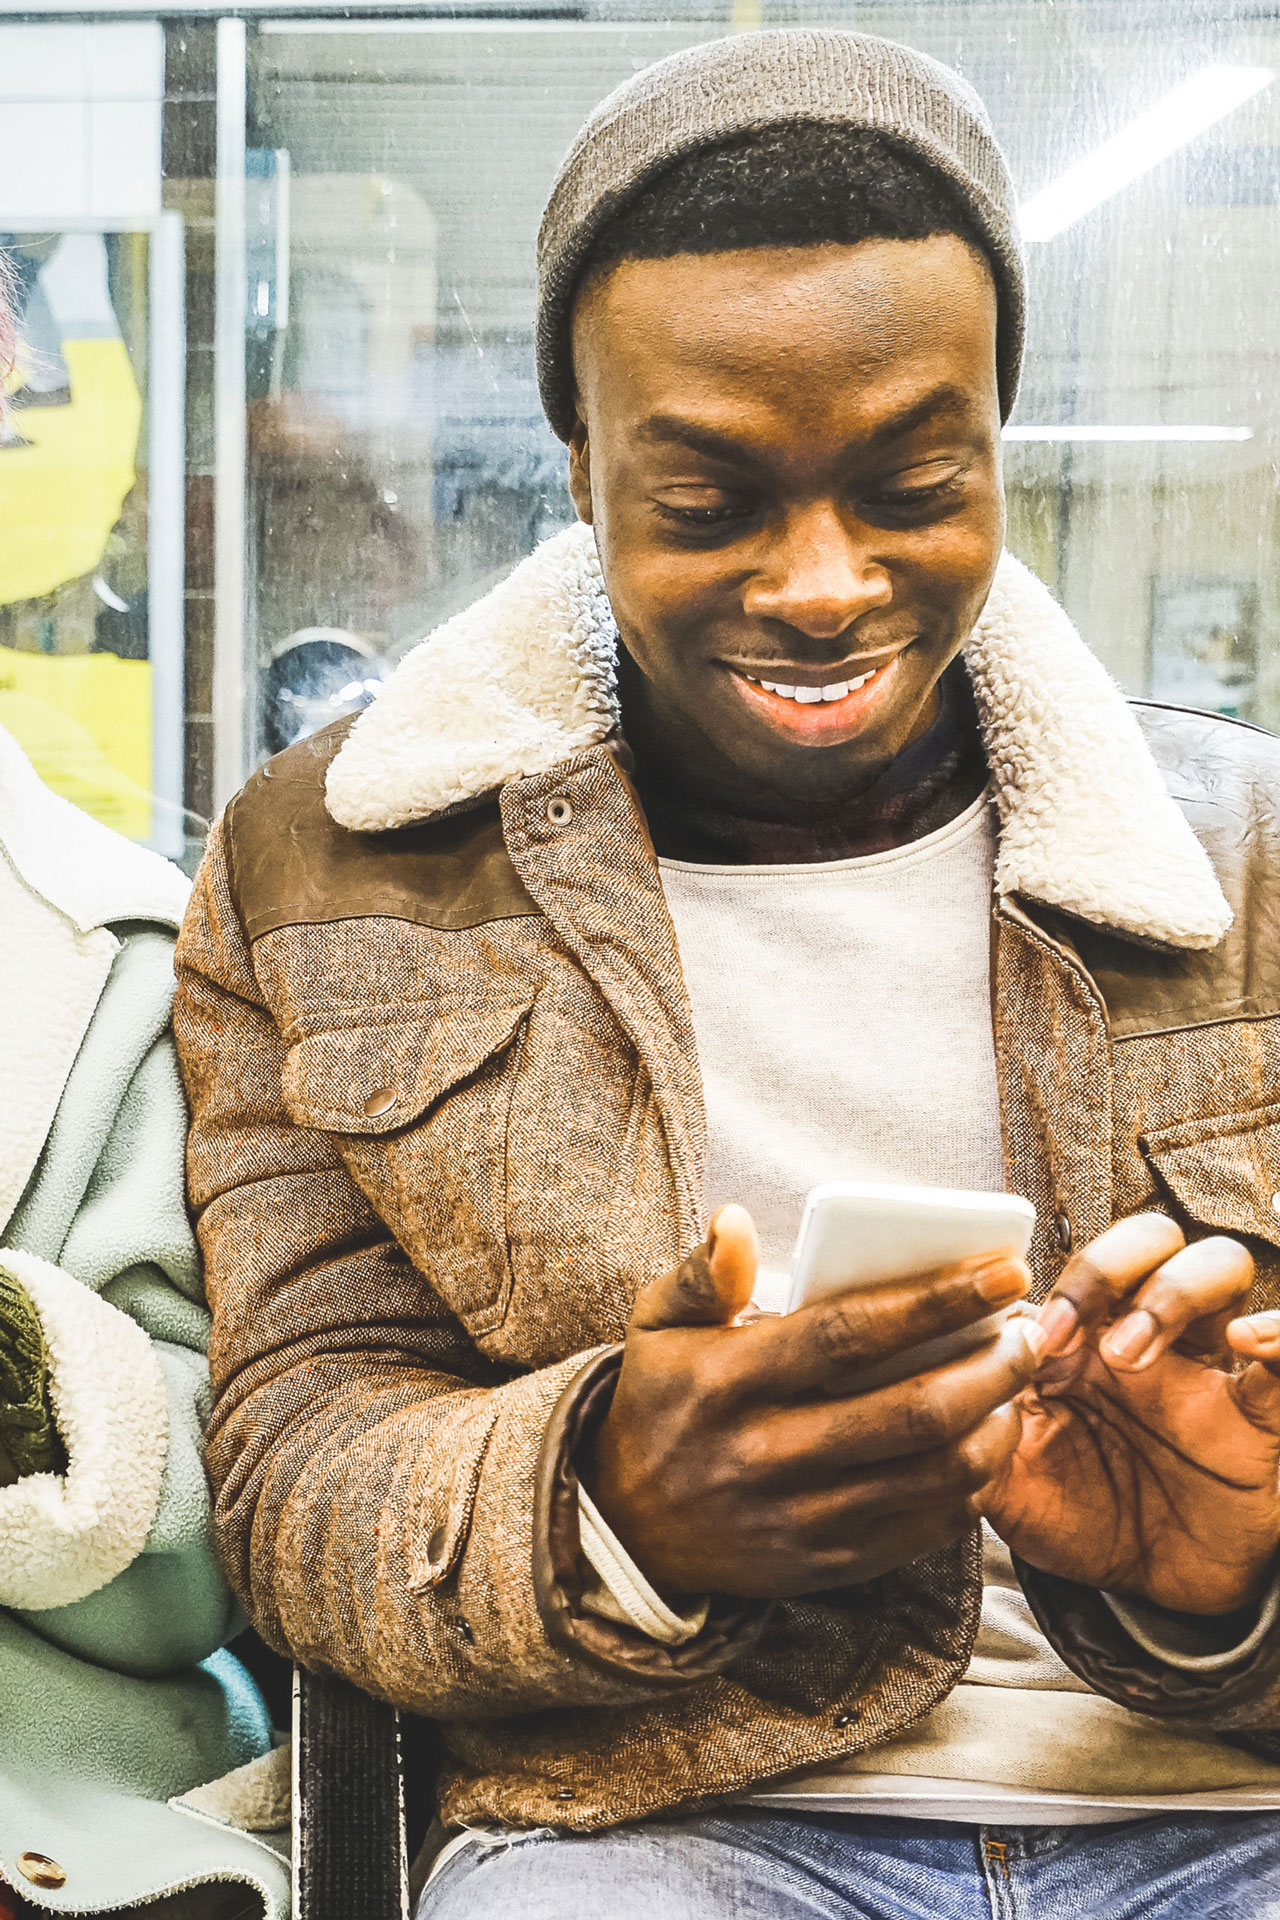 A young man uses his smartphone on public transport and smiles